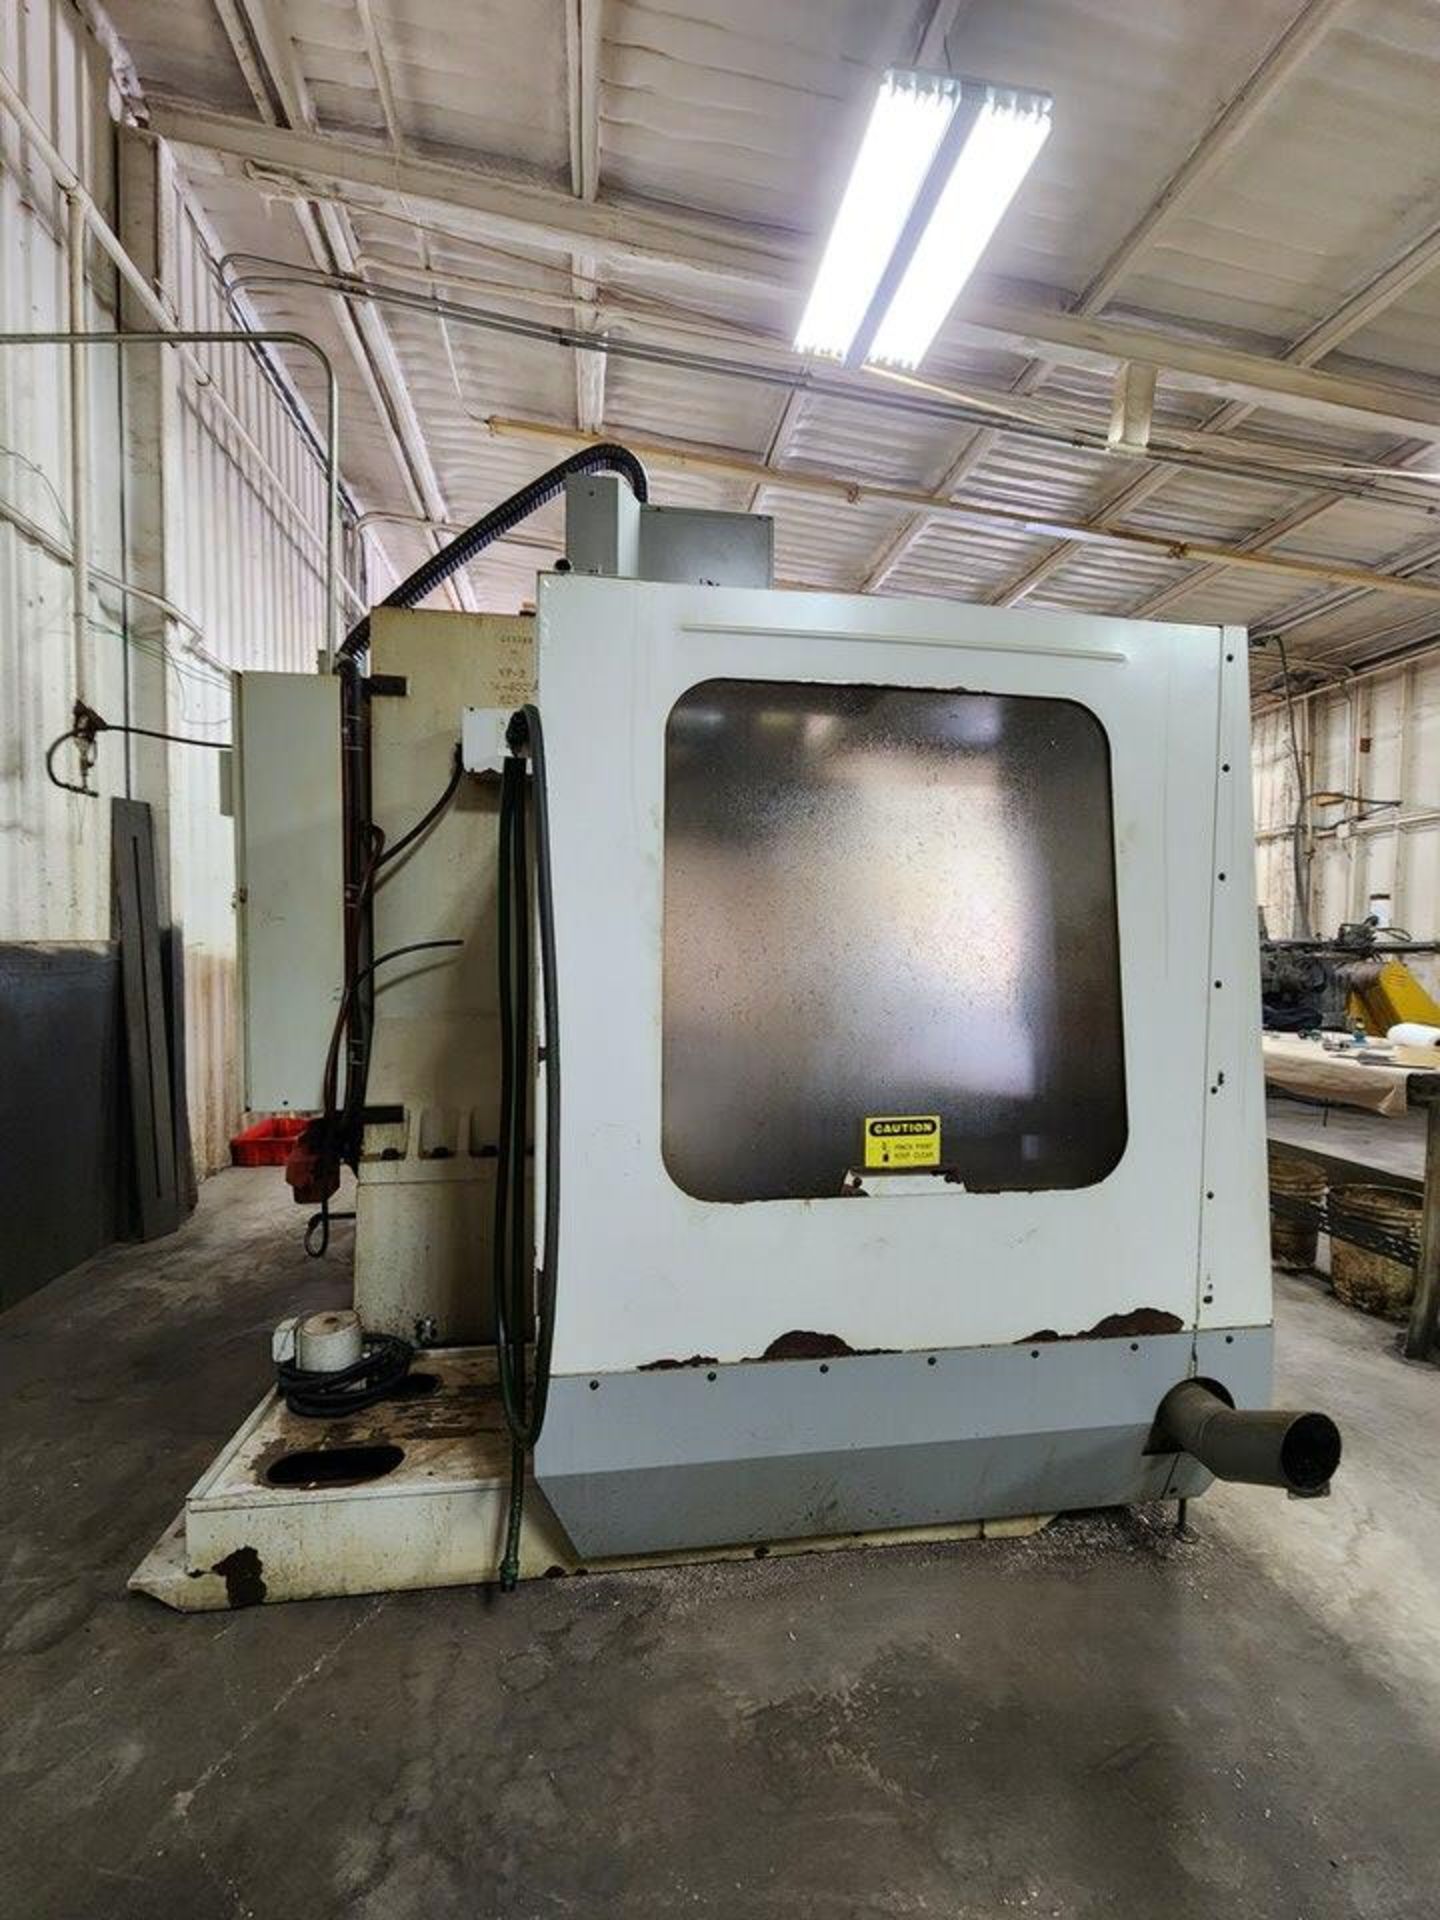 1996 Haas VF3 Milling Machine 208/230V, 3PH, 50/60HZ, Full Load: 40A; Largest Load: 30A; - Image 17 of 18